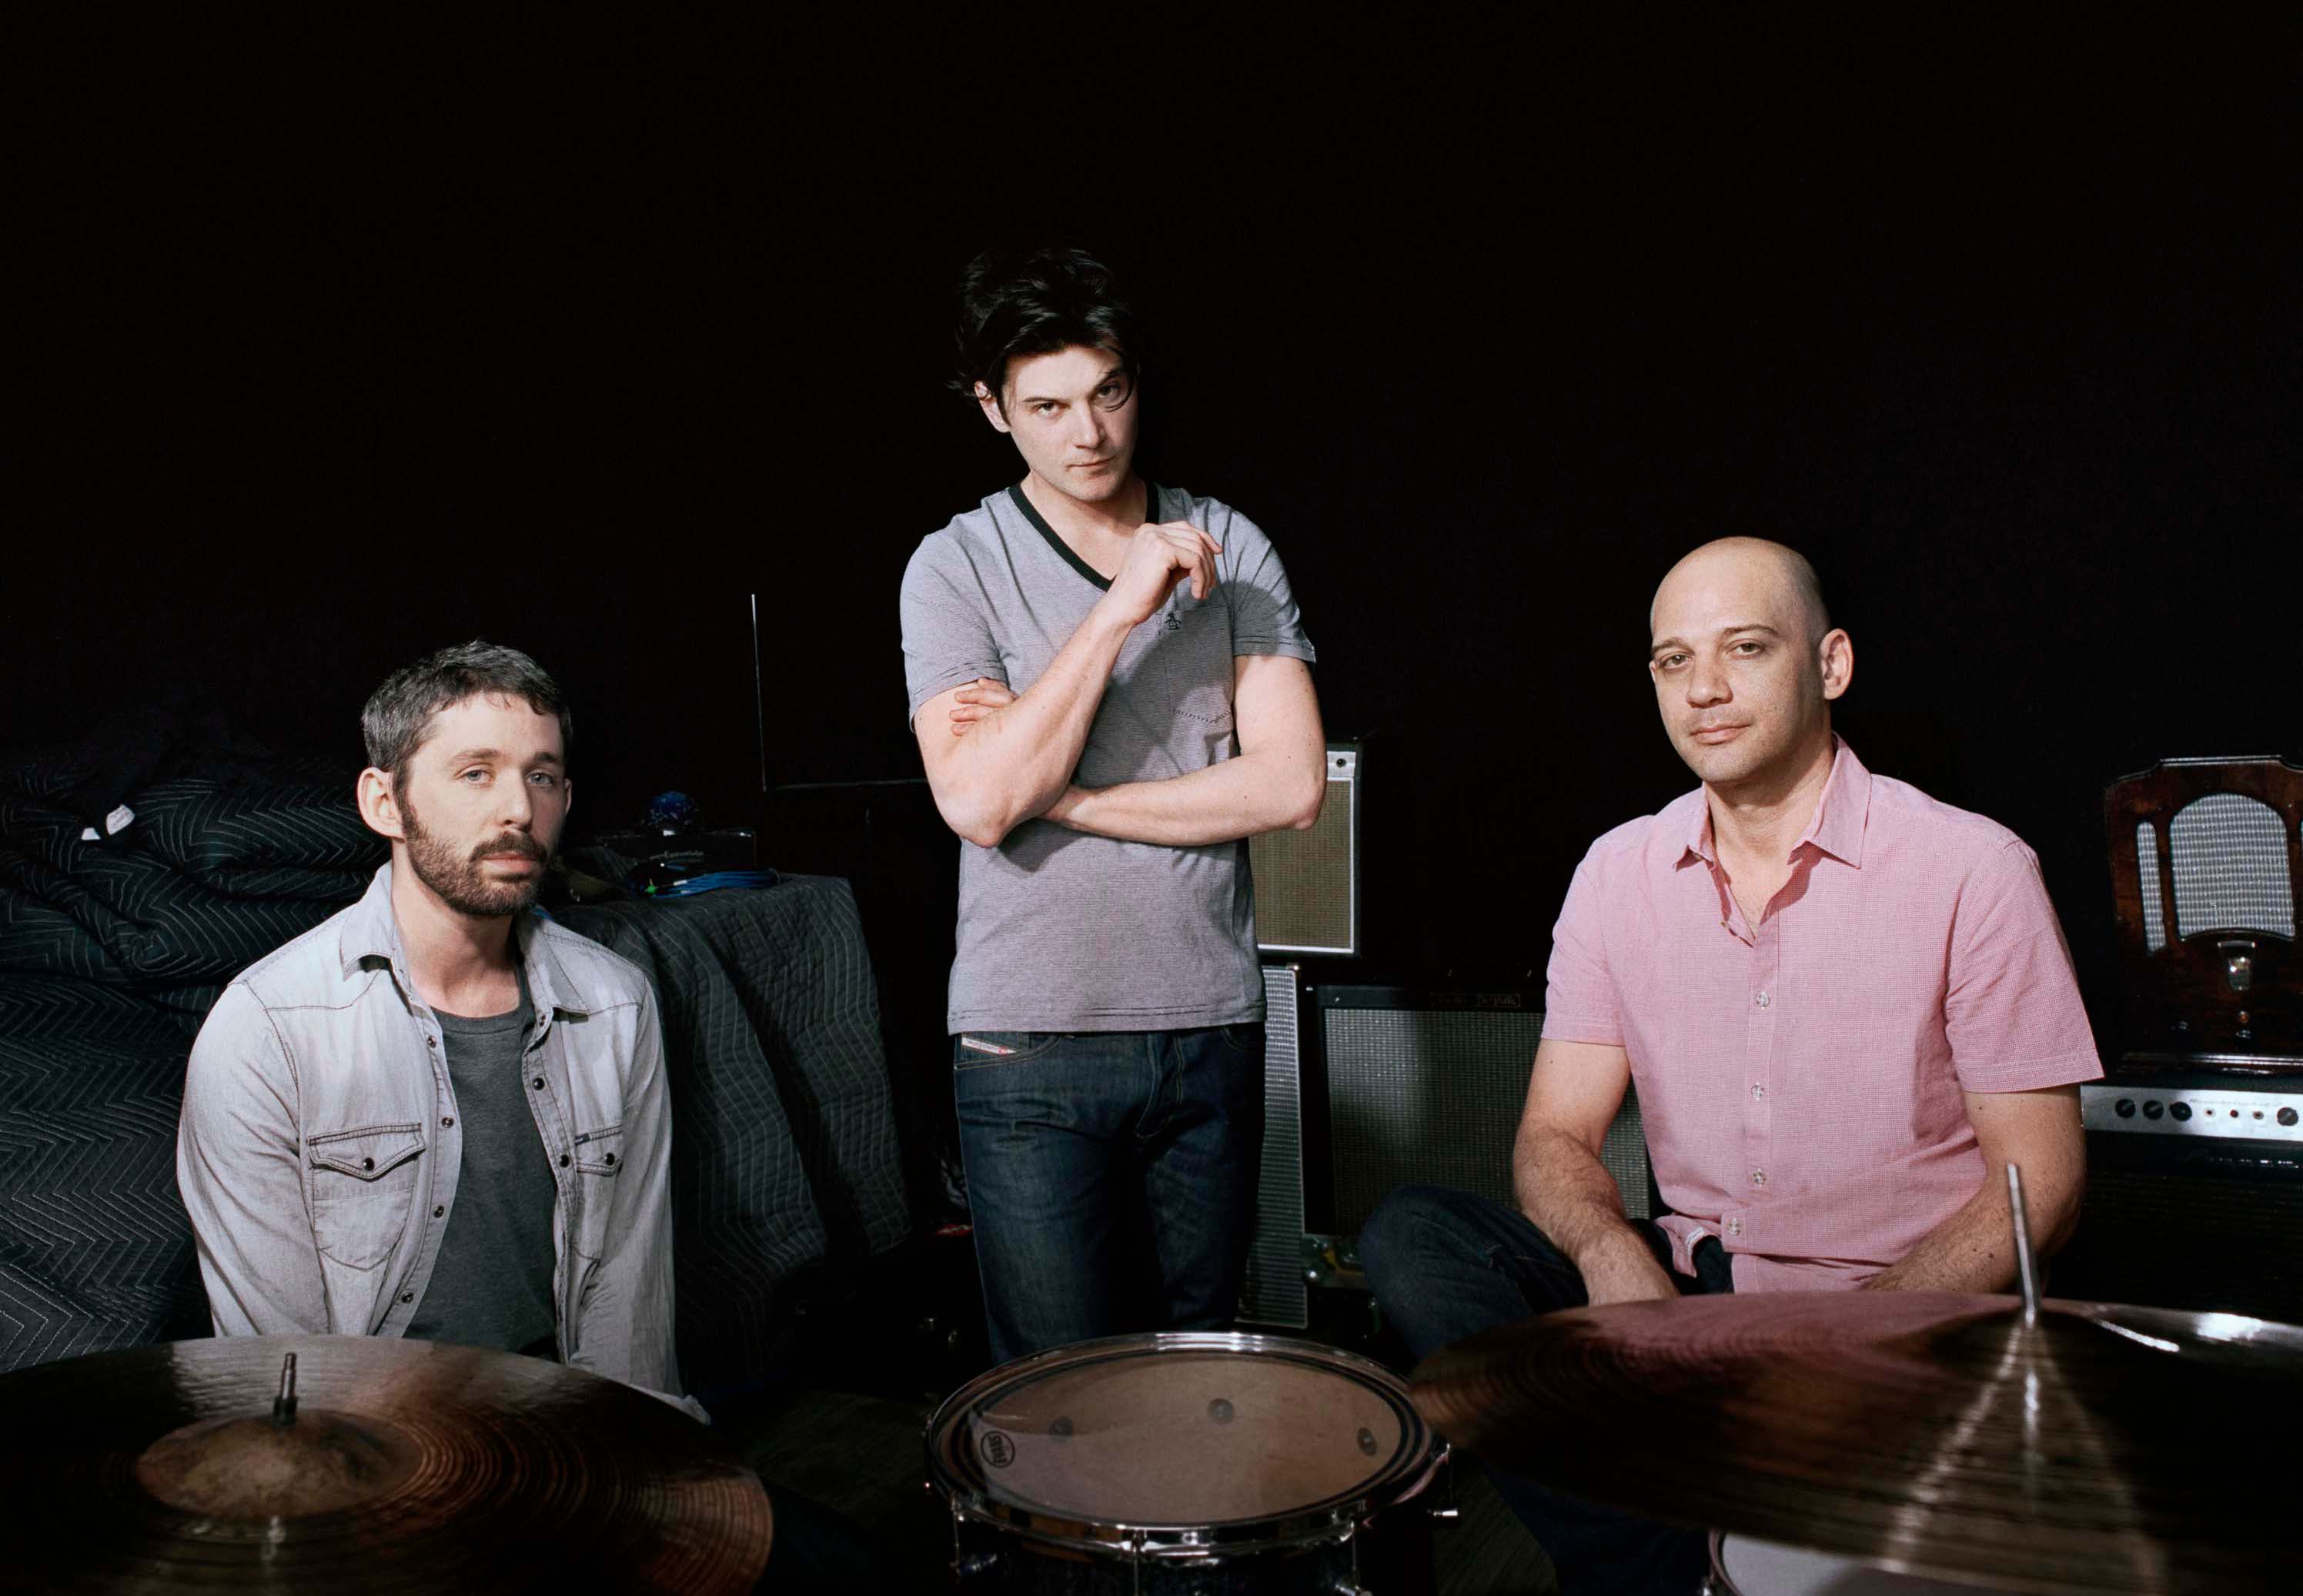 The Antlers have shared Dave Harrington's (Darkside) remix of "Director"